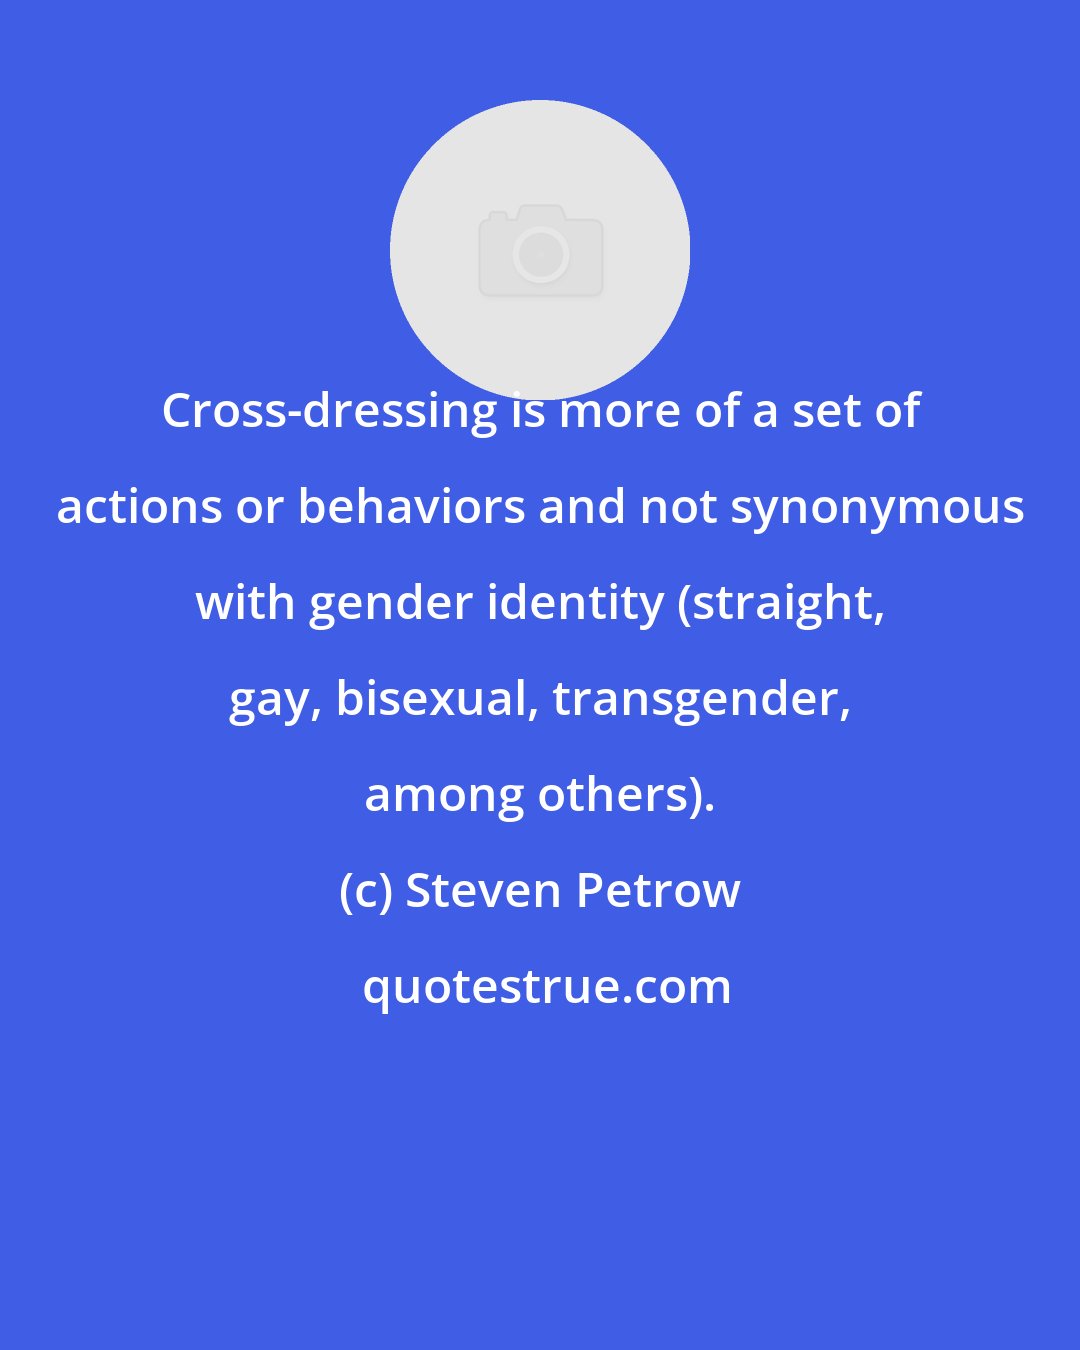 Steven Petrow: Cross-dressing is more of a set of actions or behaviors and not synonymous with gender identity (straight, gay, bisexual, transgender, among others).